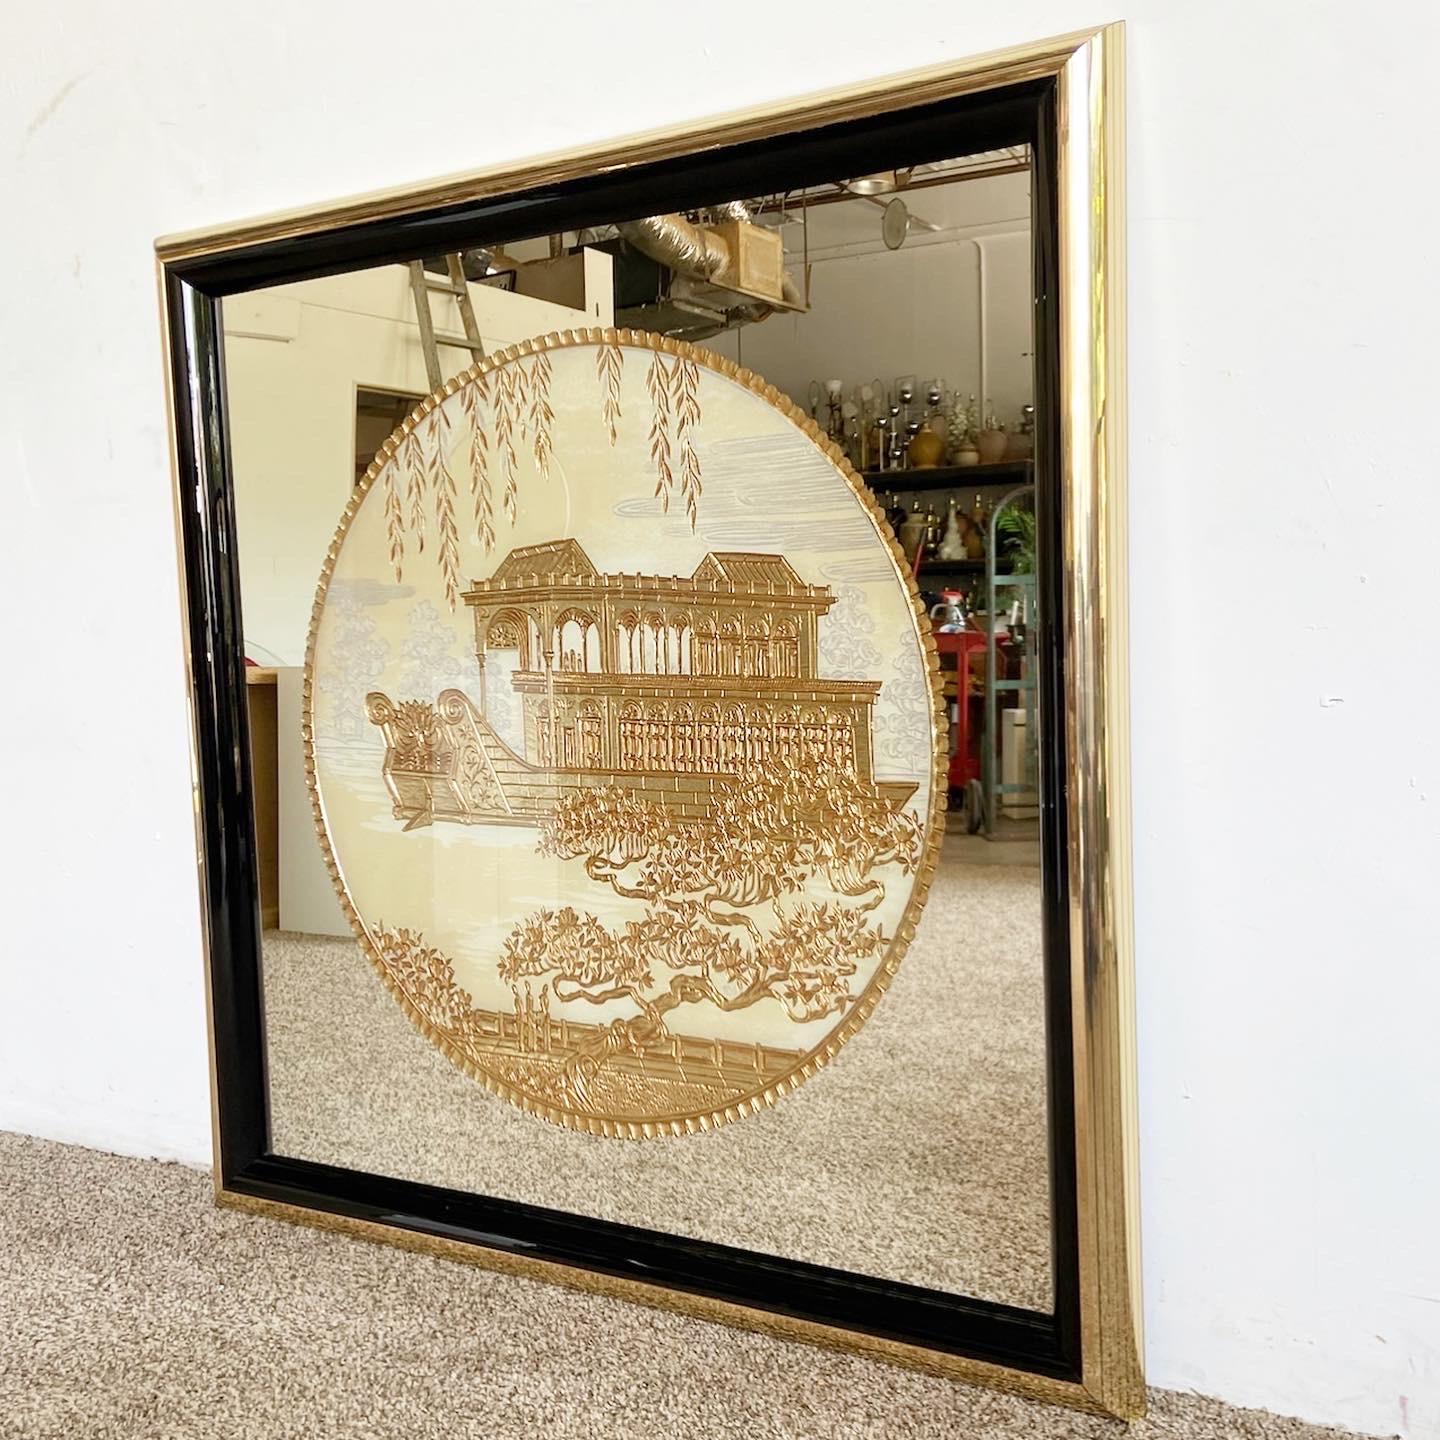 Exceptional vintage chinoiserie square wall mirror. Features a gilded, hand-carved scene of the Marble Boat at the Summer Palace in Beijing, China. Displays additional details like trees and clouds. Frame is comprised of a gold-banded outer edge,